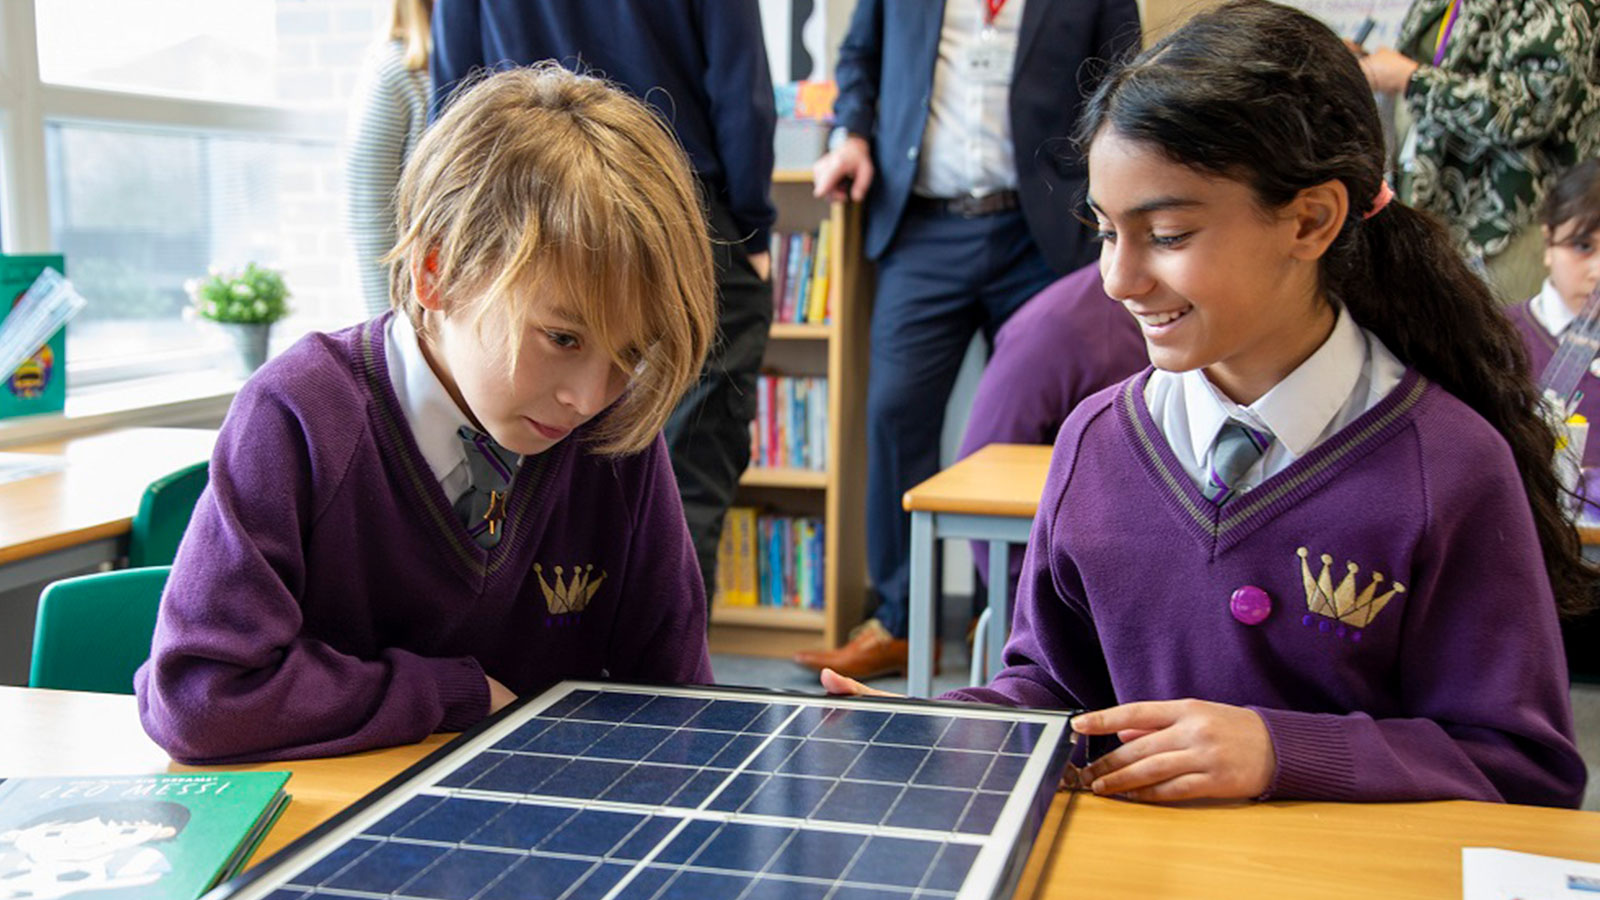 National Grid has announced a funding programme aimed at assisting schools with the installation of solar panels.